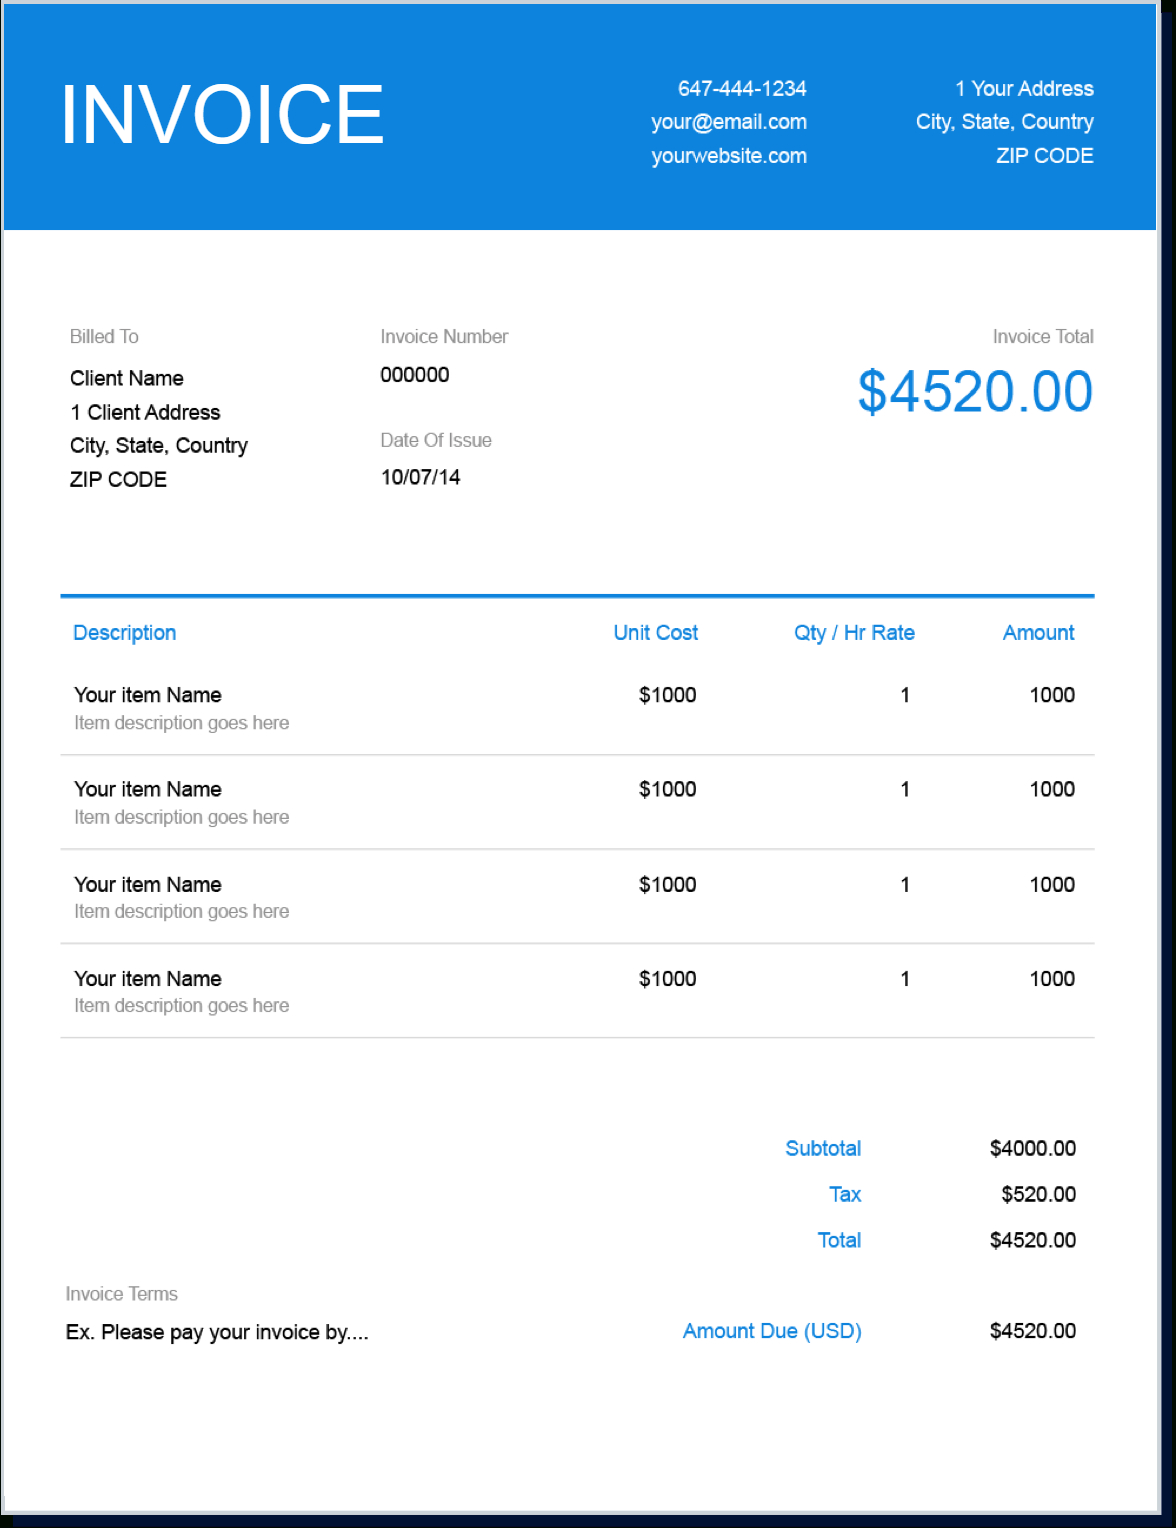 Invoice Template  Send In Minutes  Create Free Invoices Instantly with Image Of Invoice Template